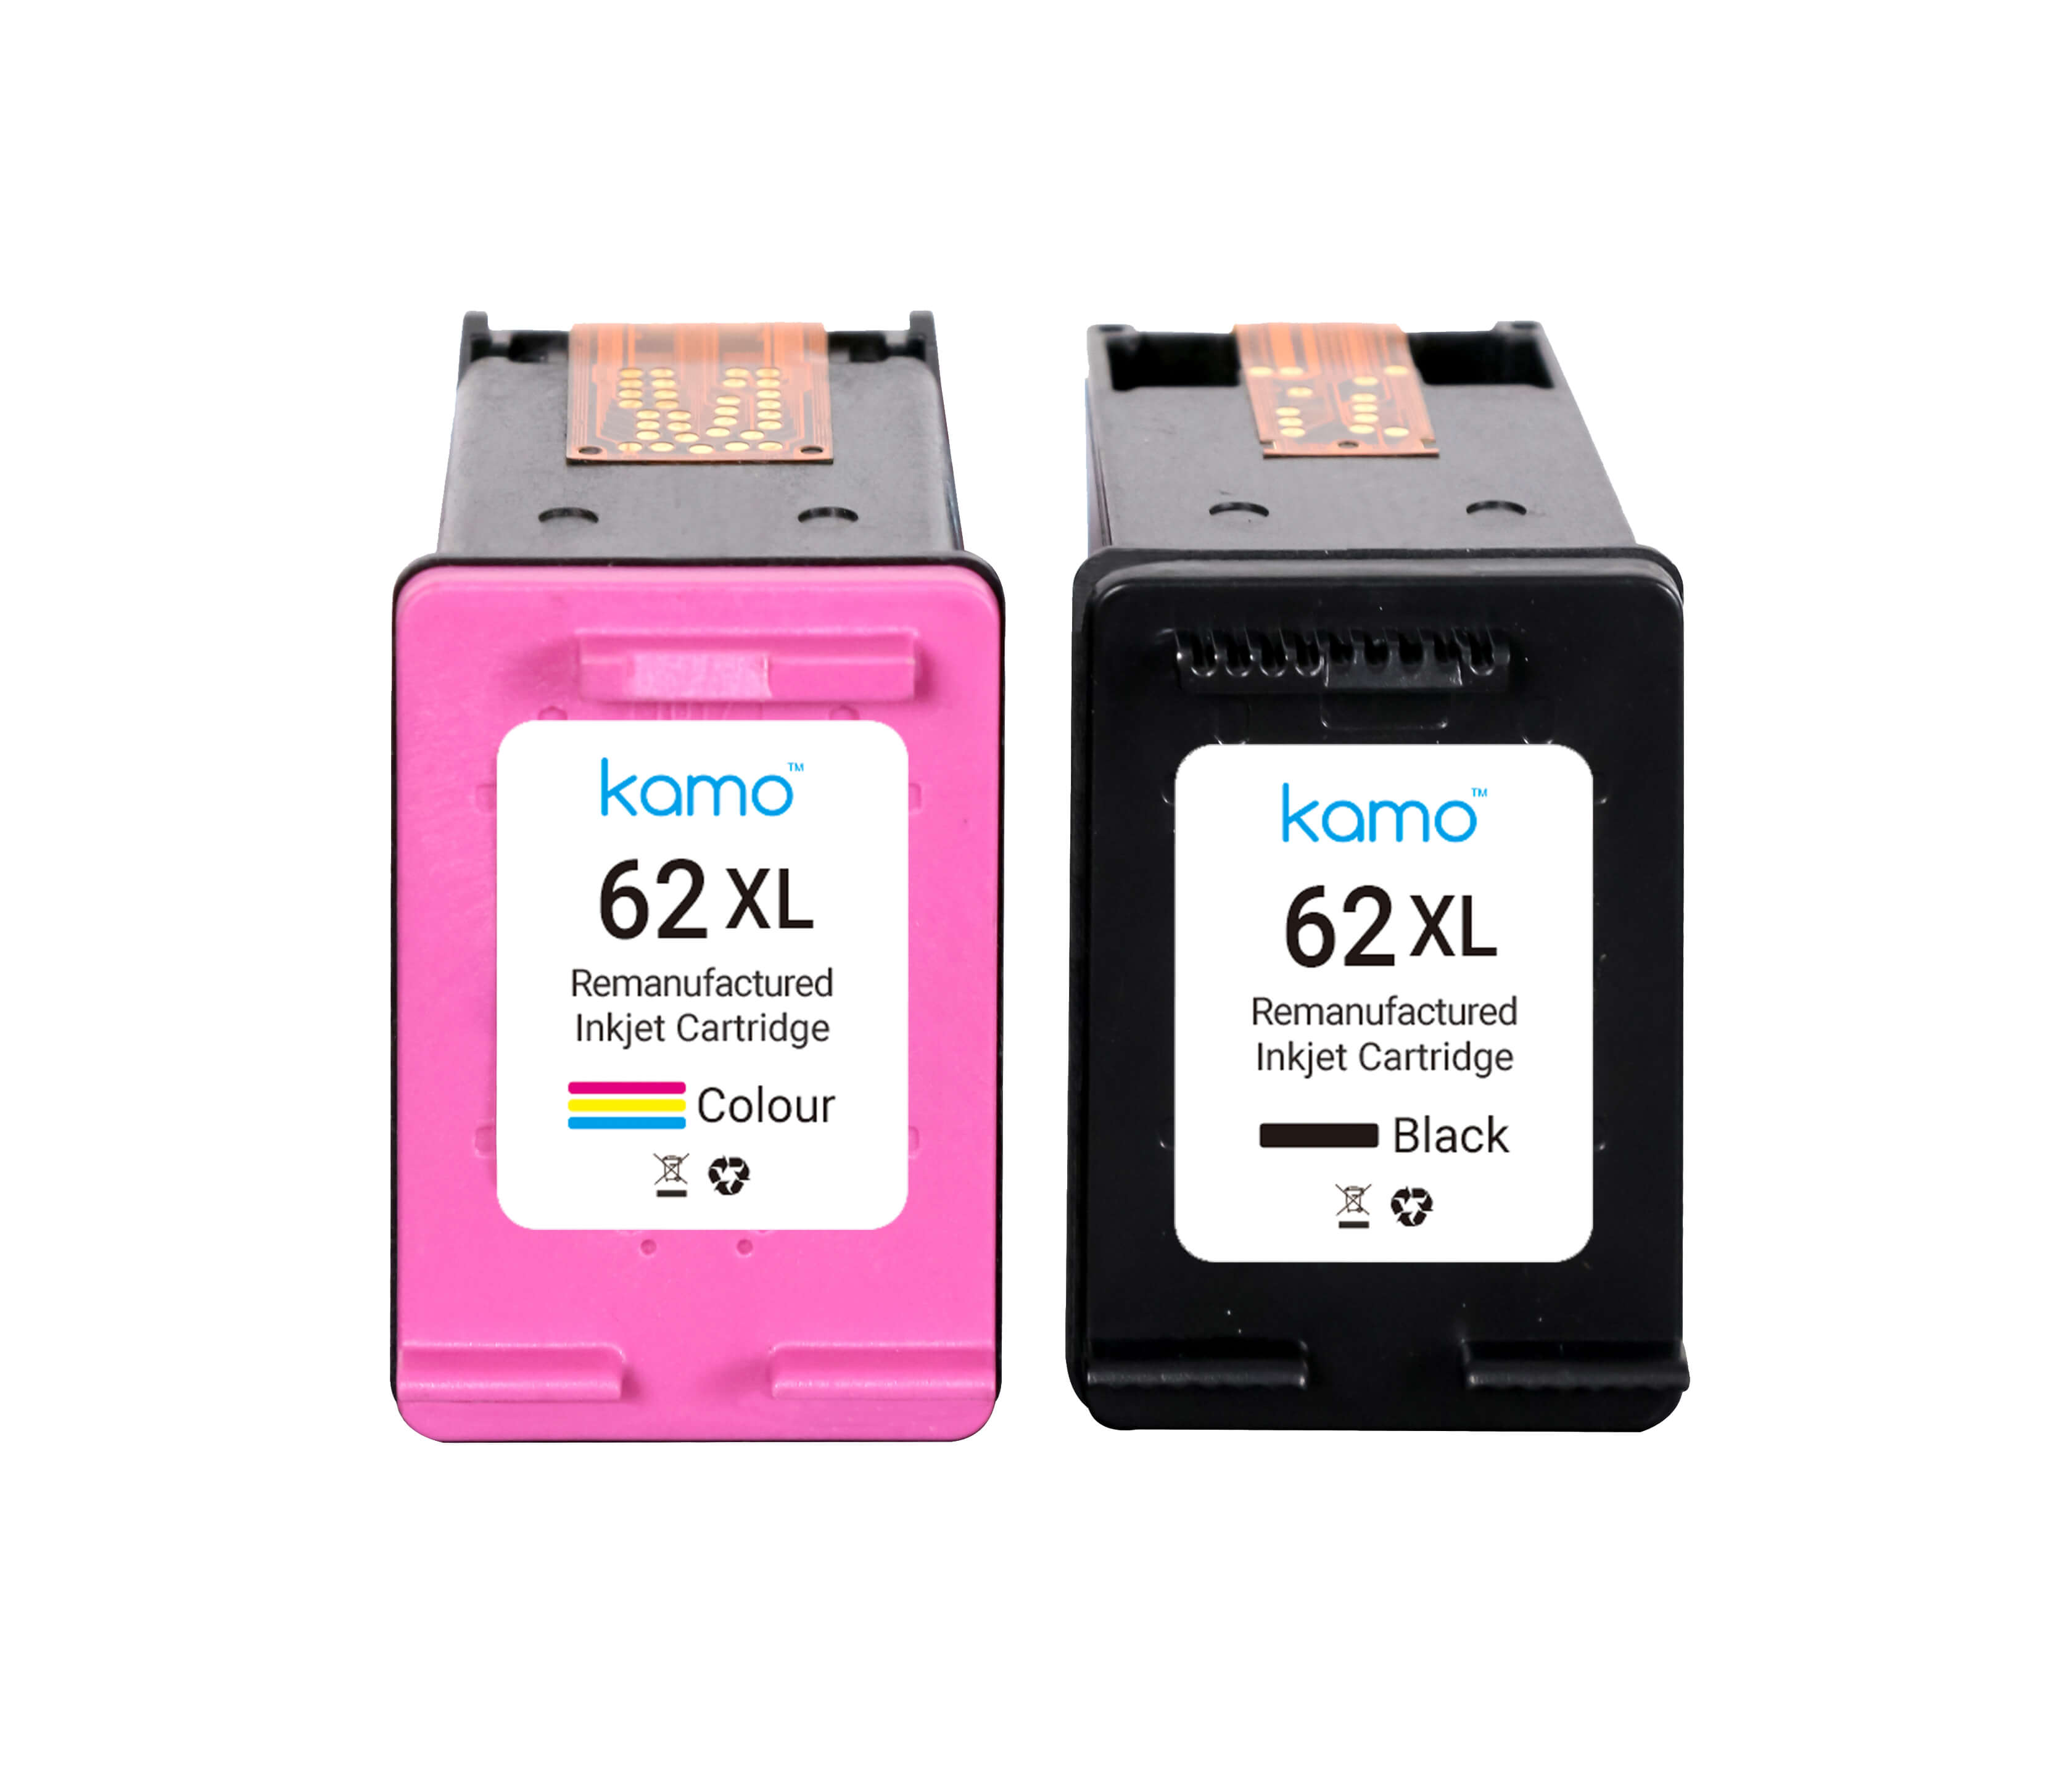 Kamo 62 XL for HP 62 62XL Ink Cartridges (2 Pack)